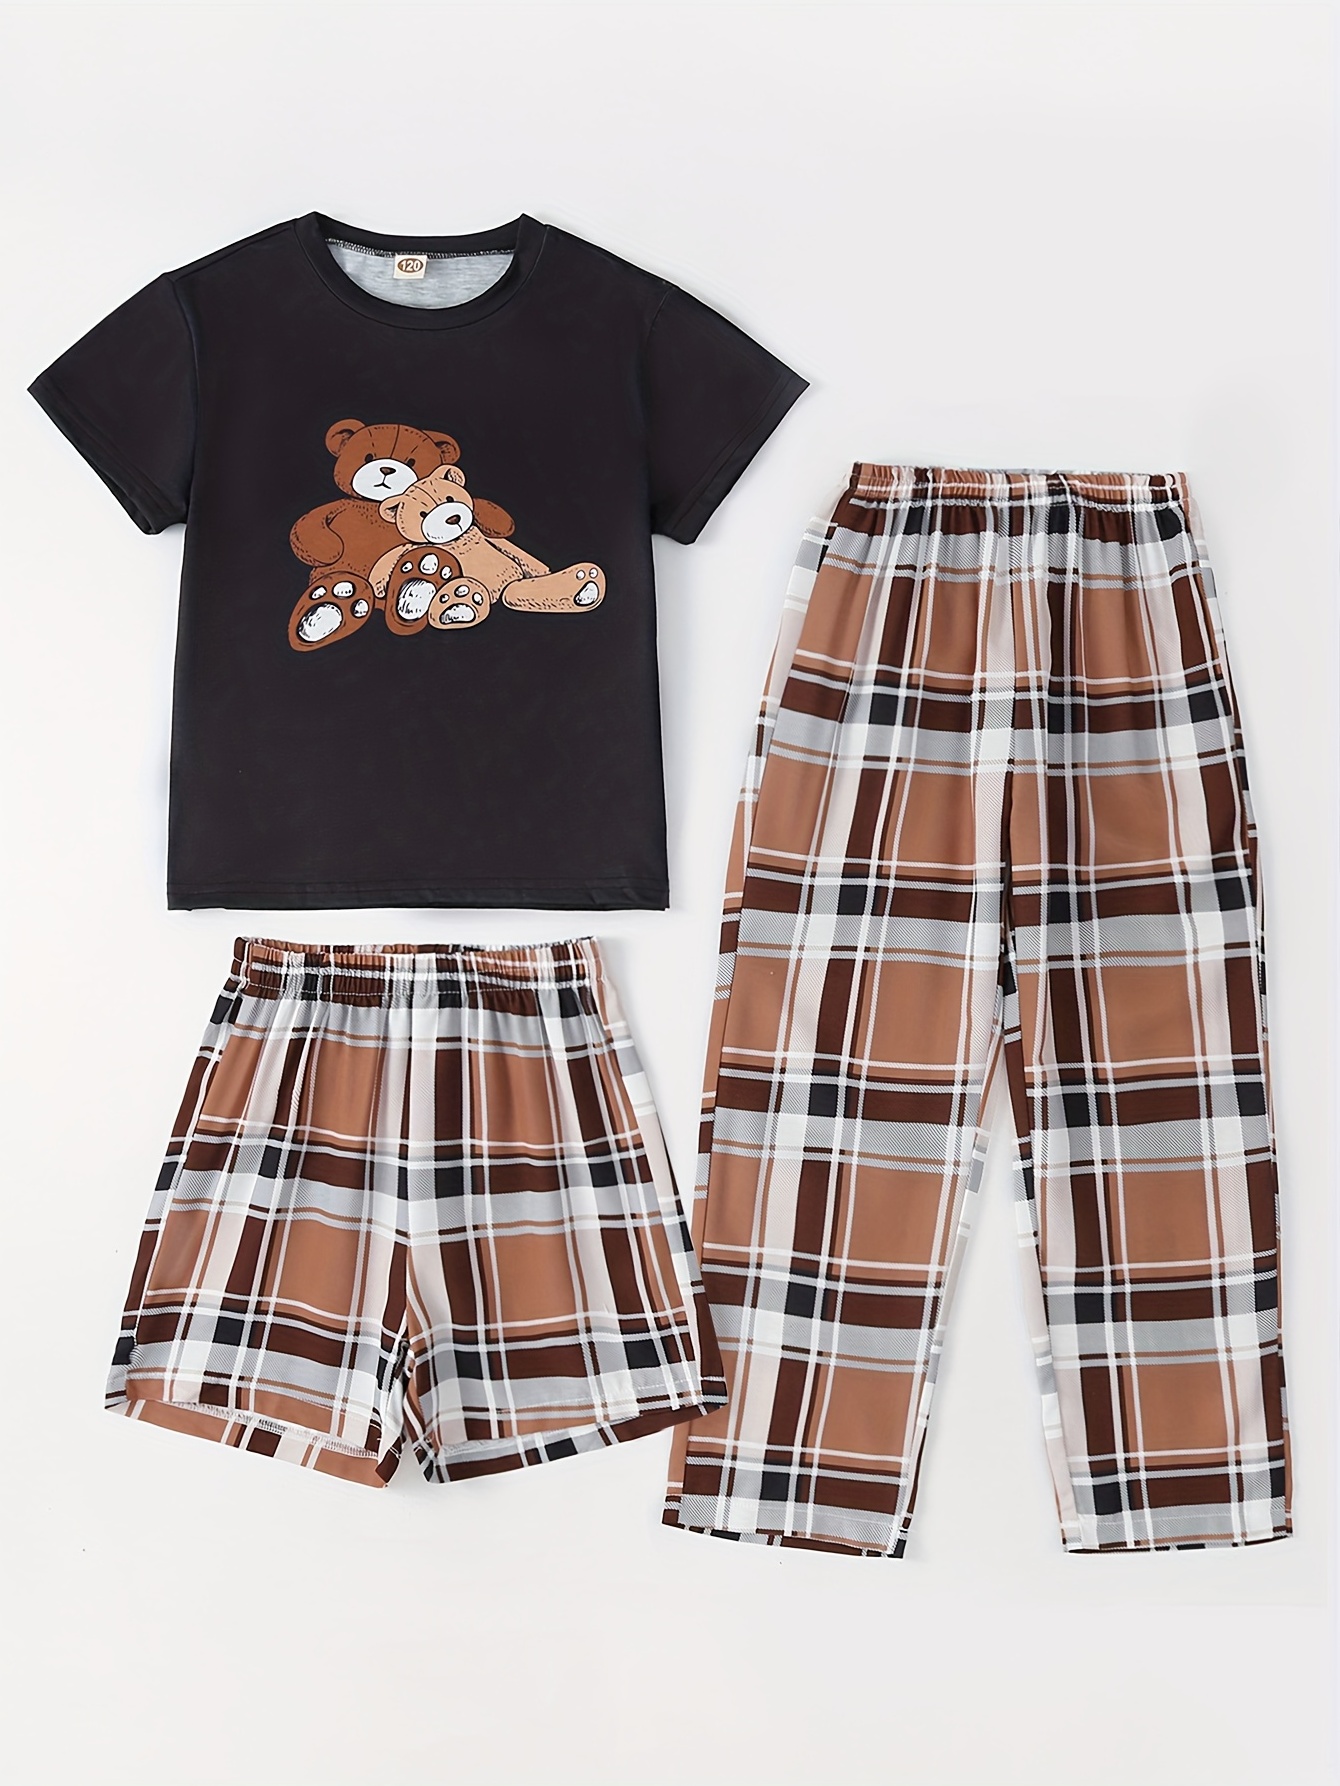 Girls Pajamas Outfit Cute Bear Graphic Crew Neck T shirt Top